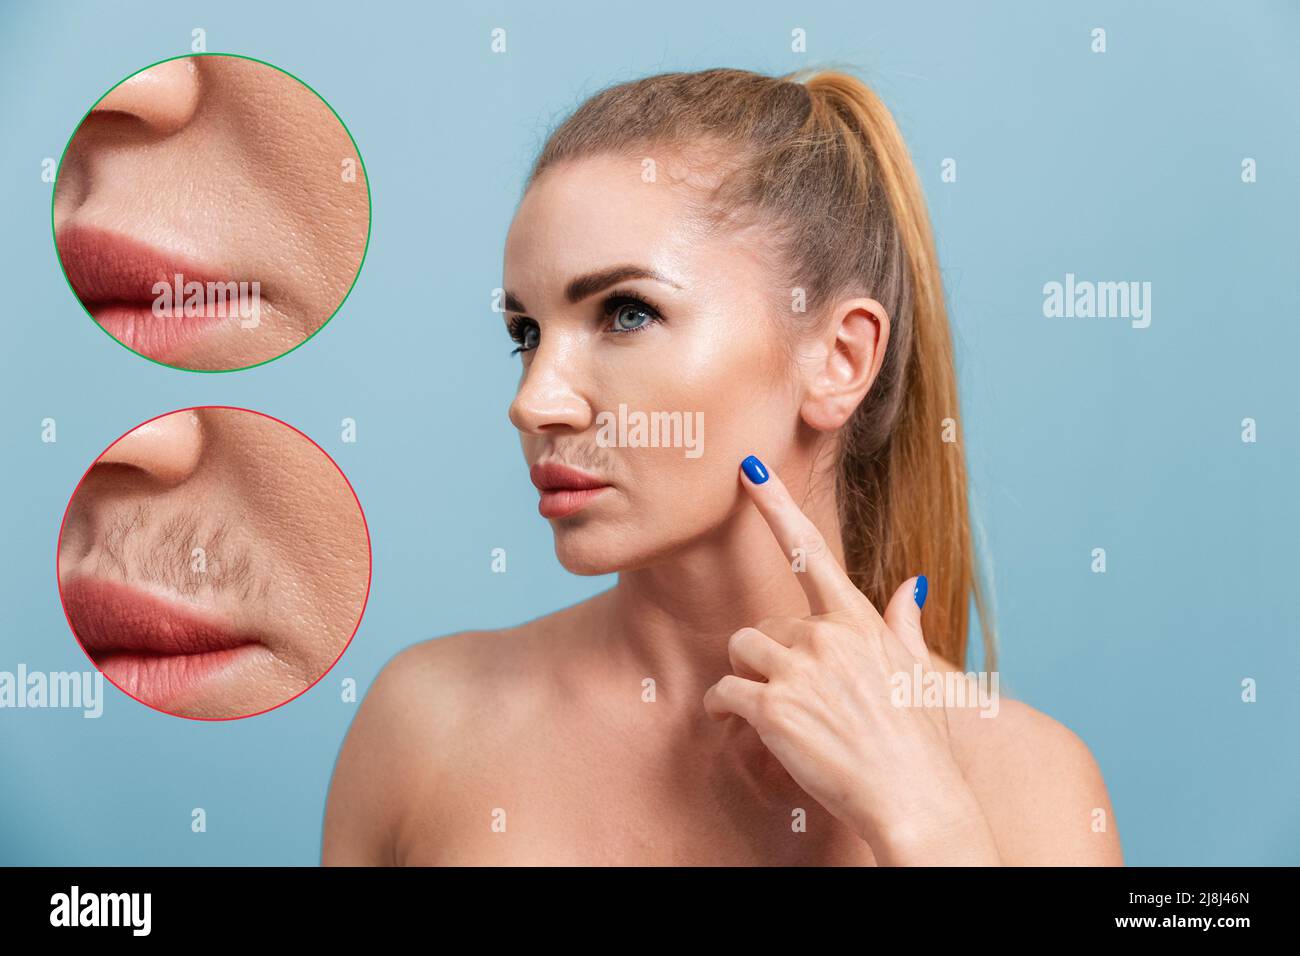 Portrait of a young Caucasian woman pointing to a mustache above her upper lip. The result before and after the epilation procedure. Blue background. Stock Photo